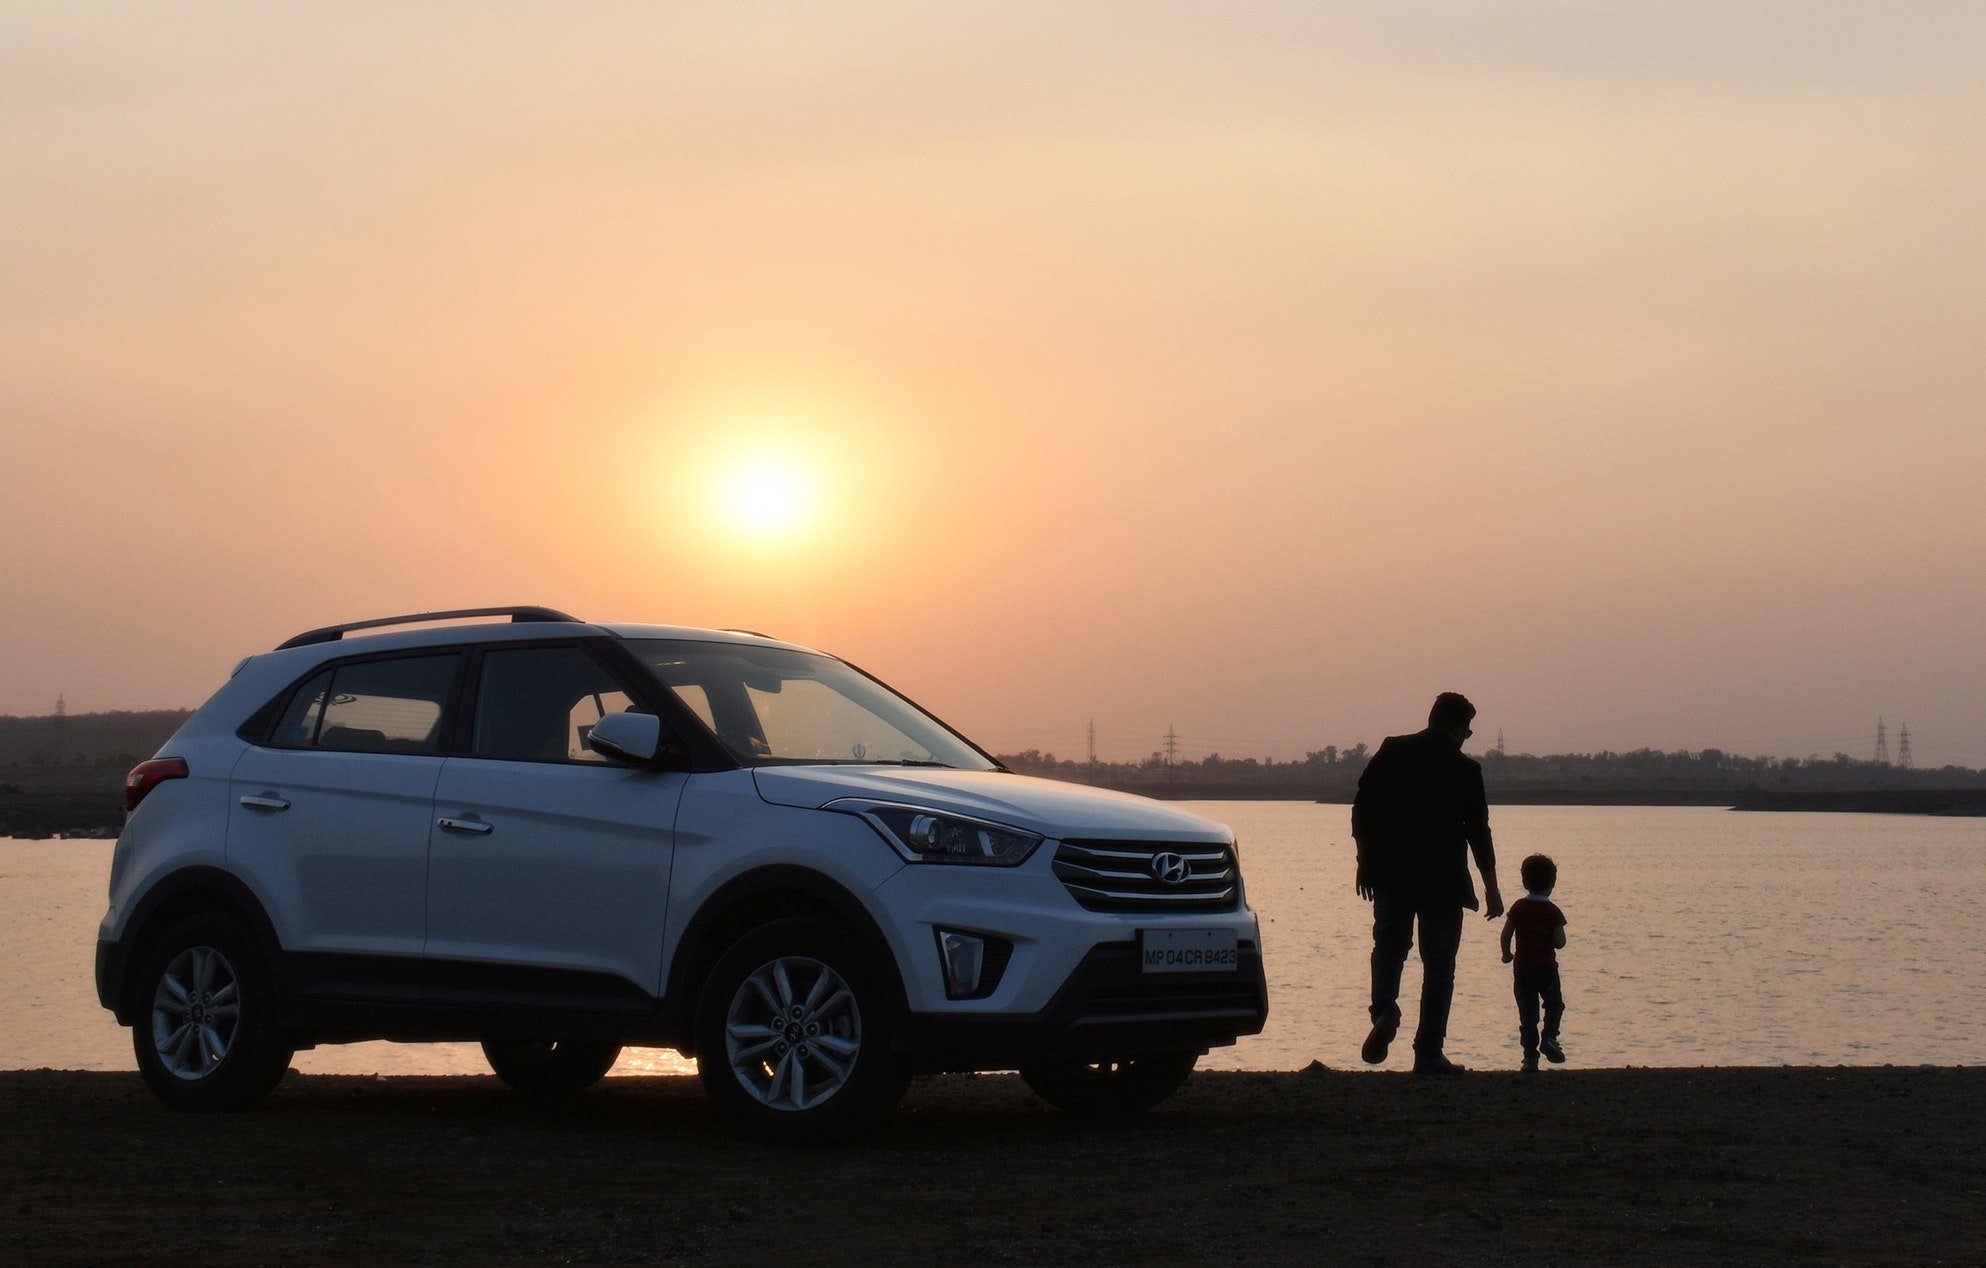 Man and child near a car with a sun setting in the background | Photo: Pexels